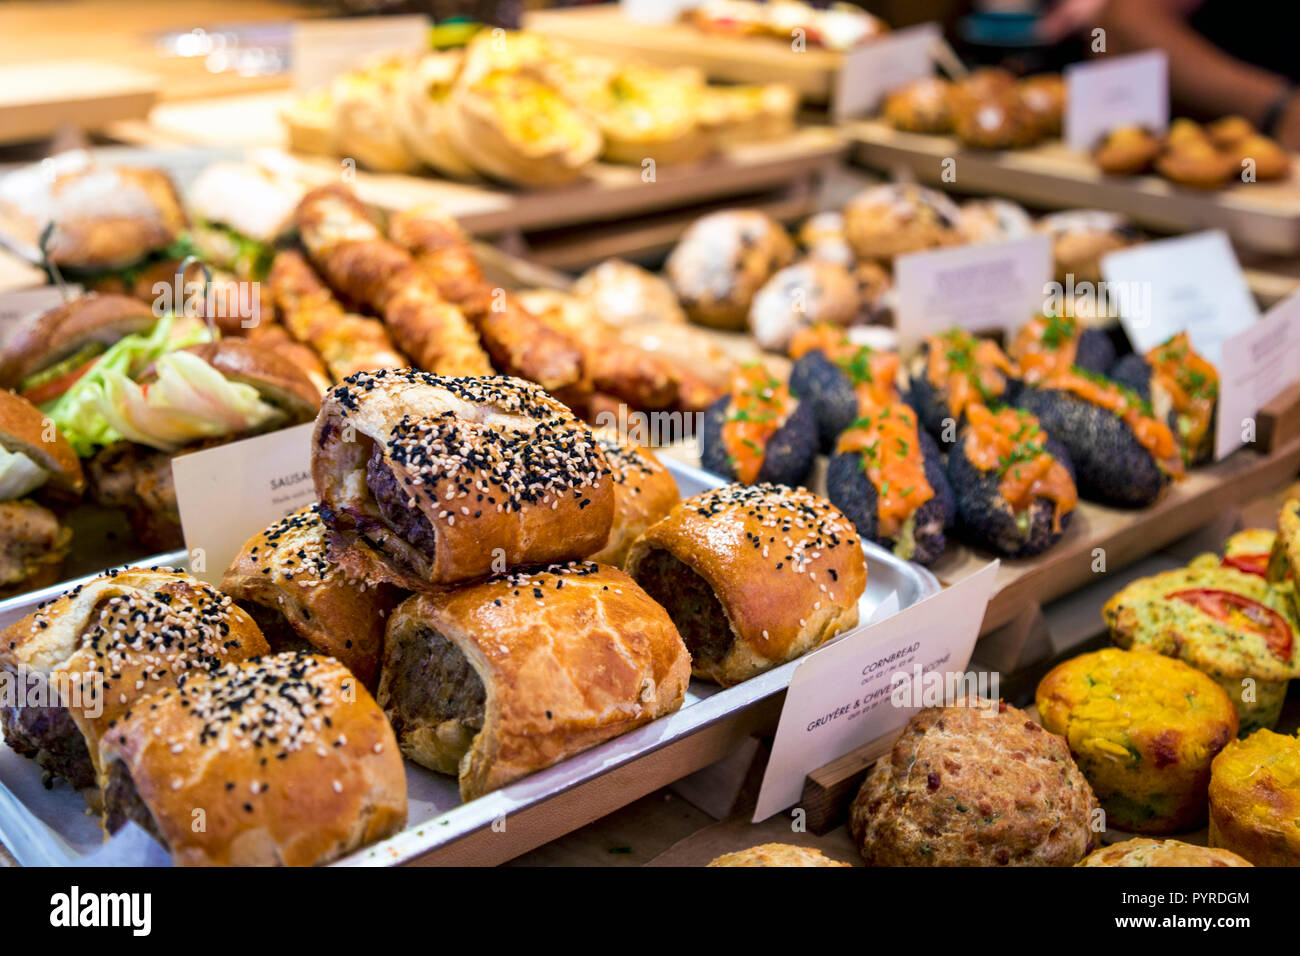 Delicious sausage rolls and selection of breads and sandwiches at a cafe / bakery (Gail's), London, UK Stock Photo